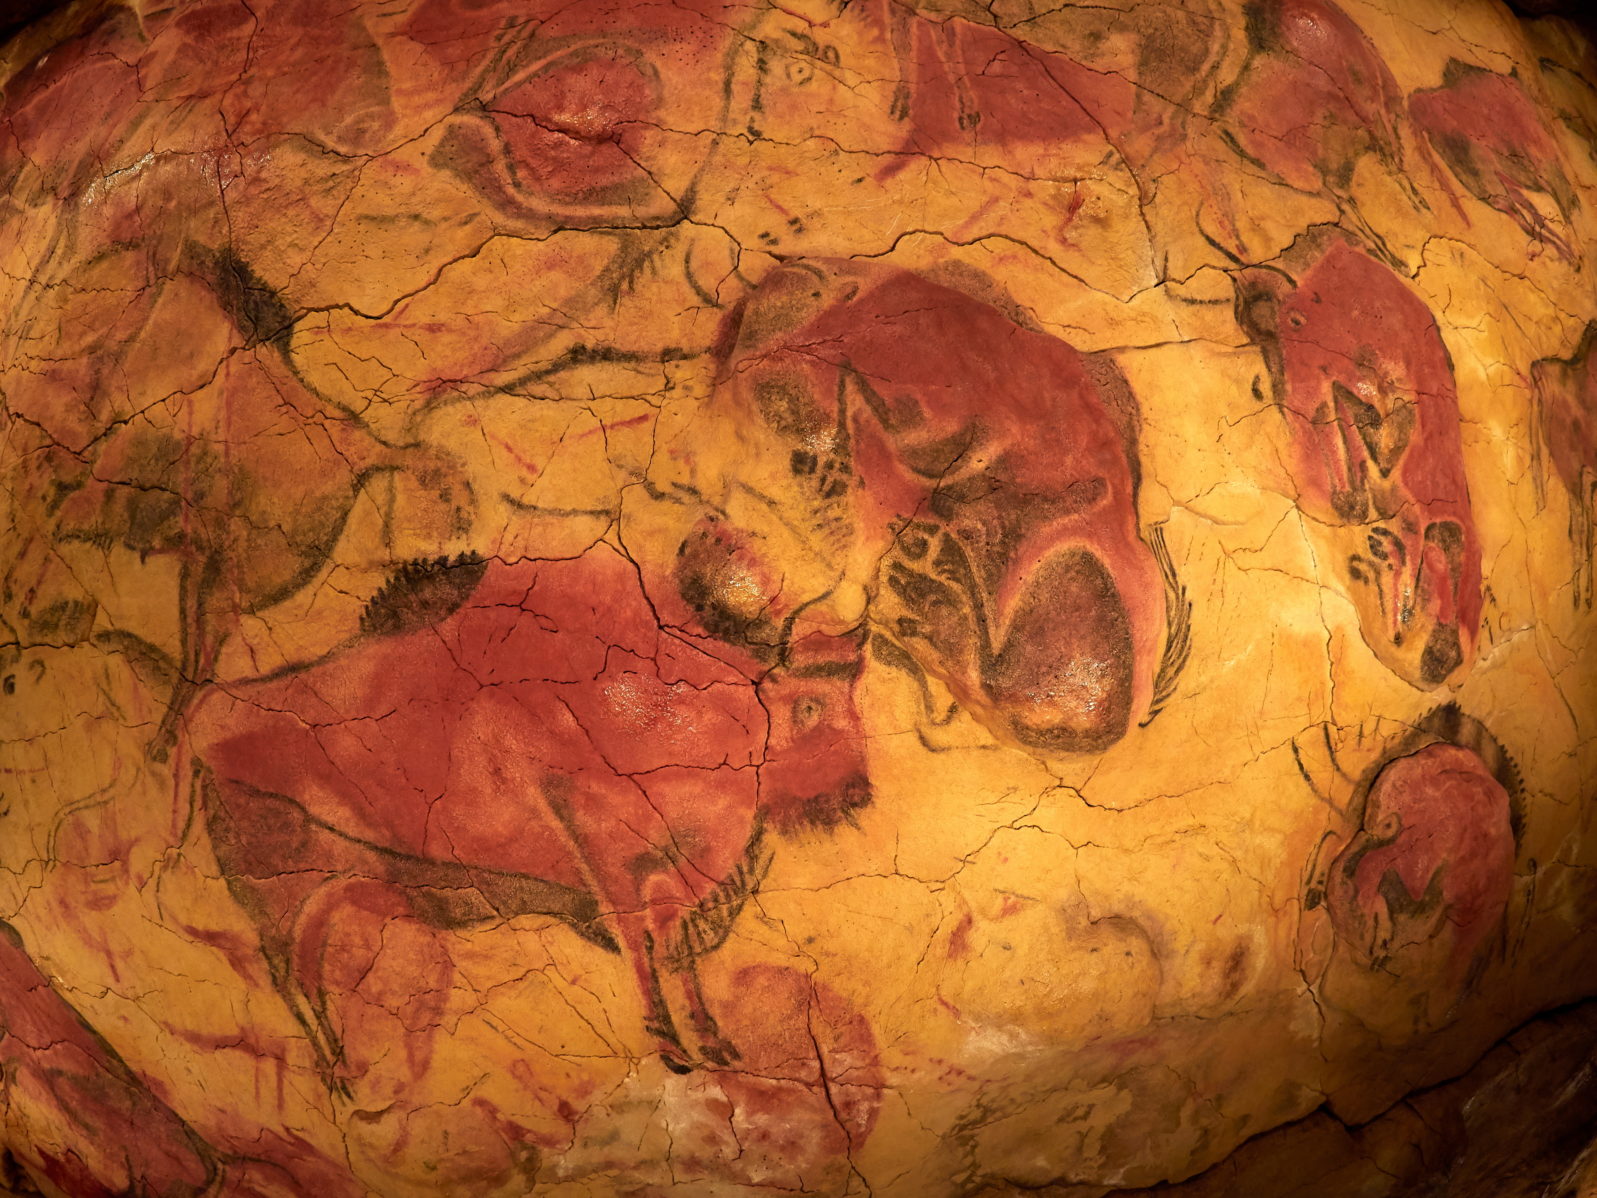 the drawings from the ceiling of Altamira cave in Santillana Del Mar, Cantabria, Spain